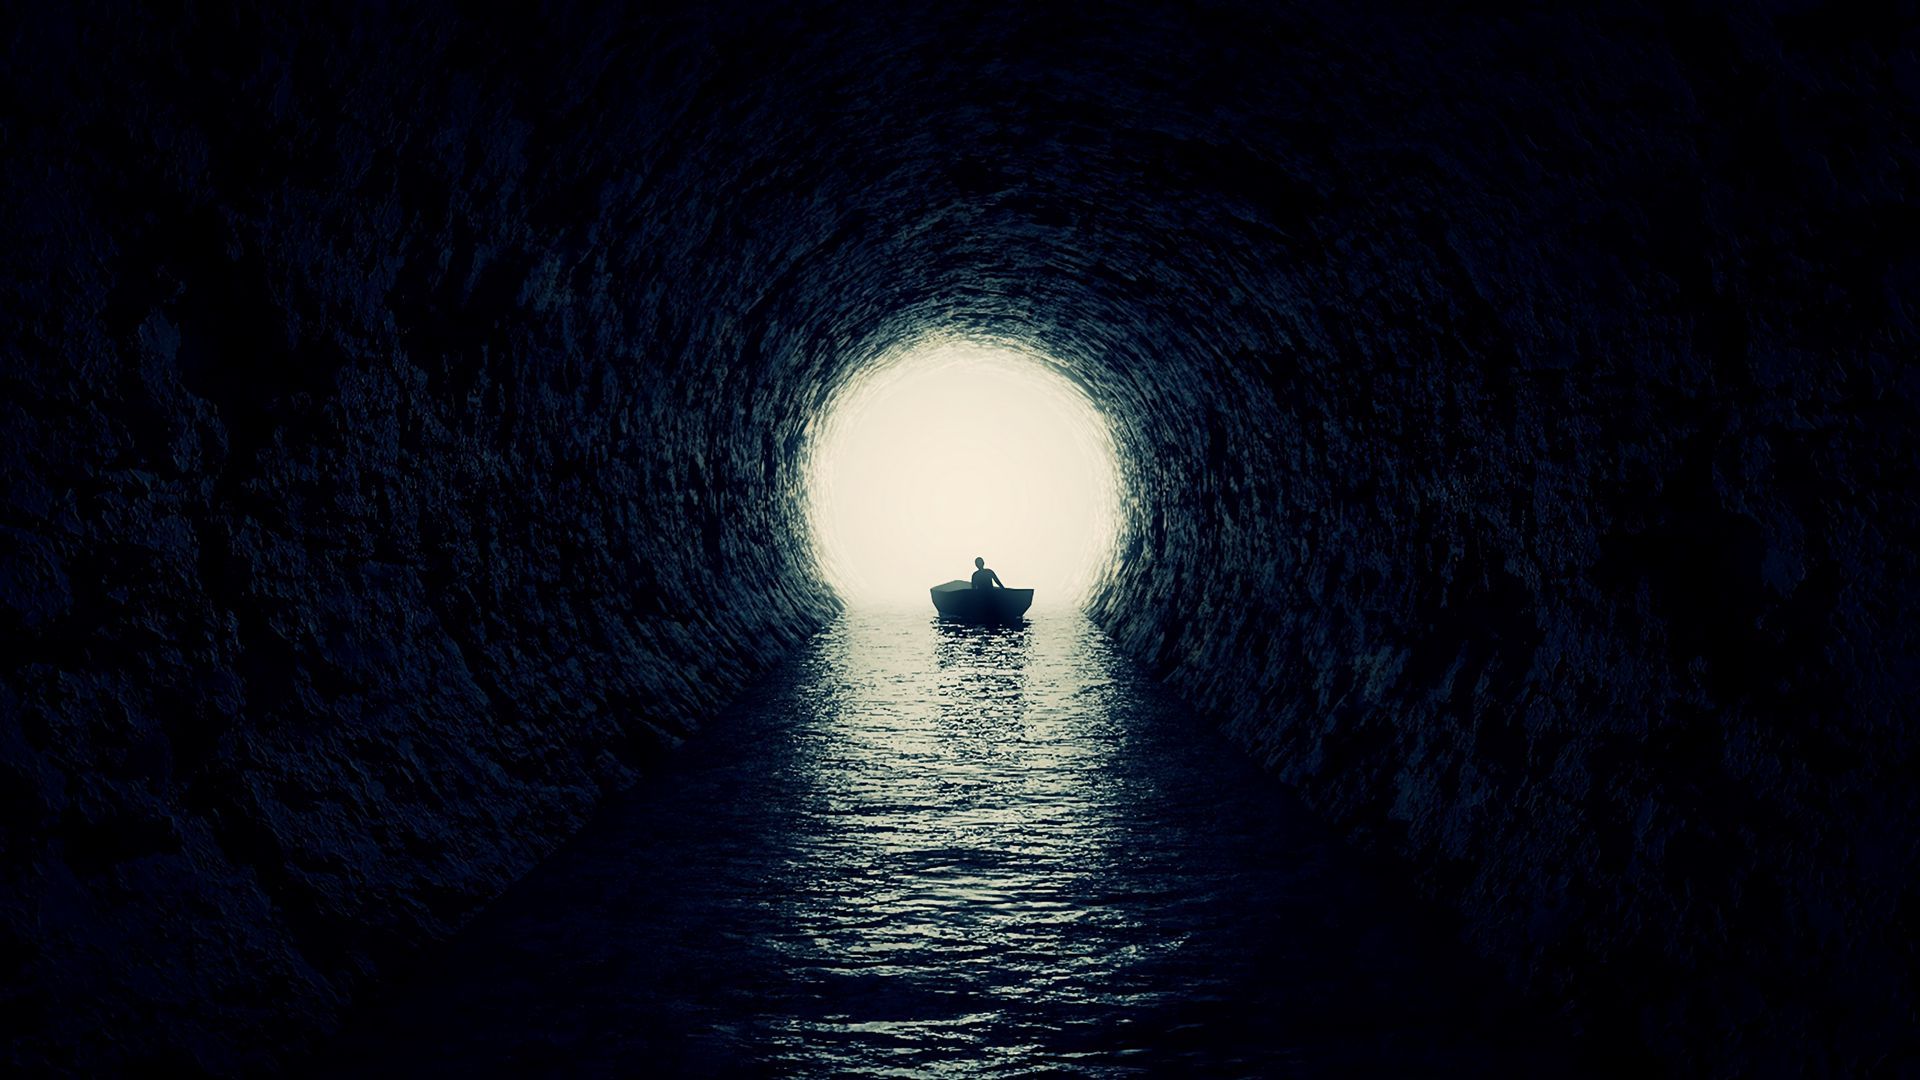 Download wallpaper 1920x1080 cave, boat, silhouette, water, dark full hd, hdtv, fhd, 1080p HD background